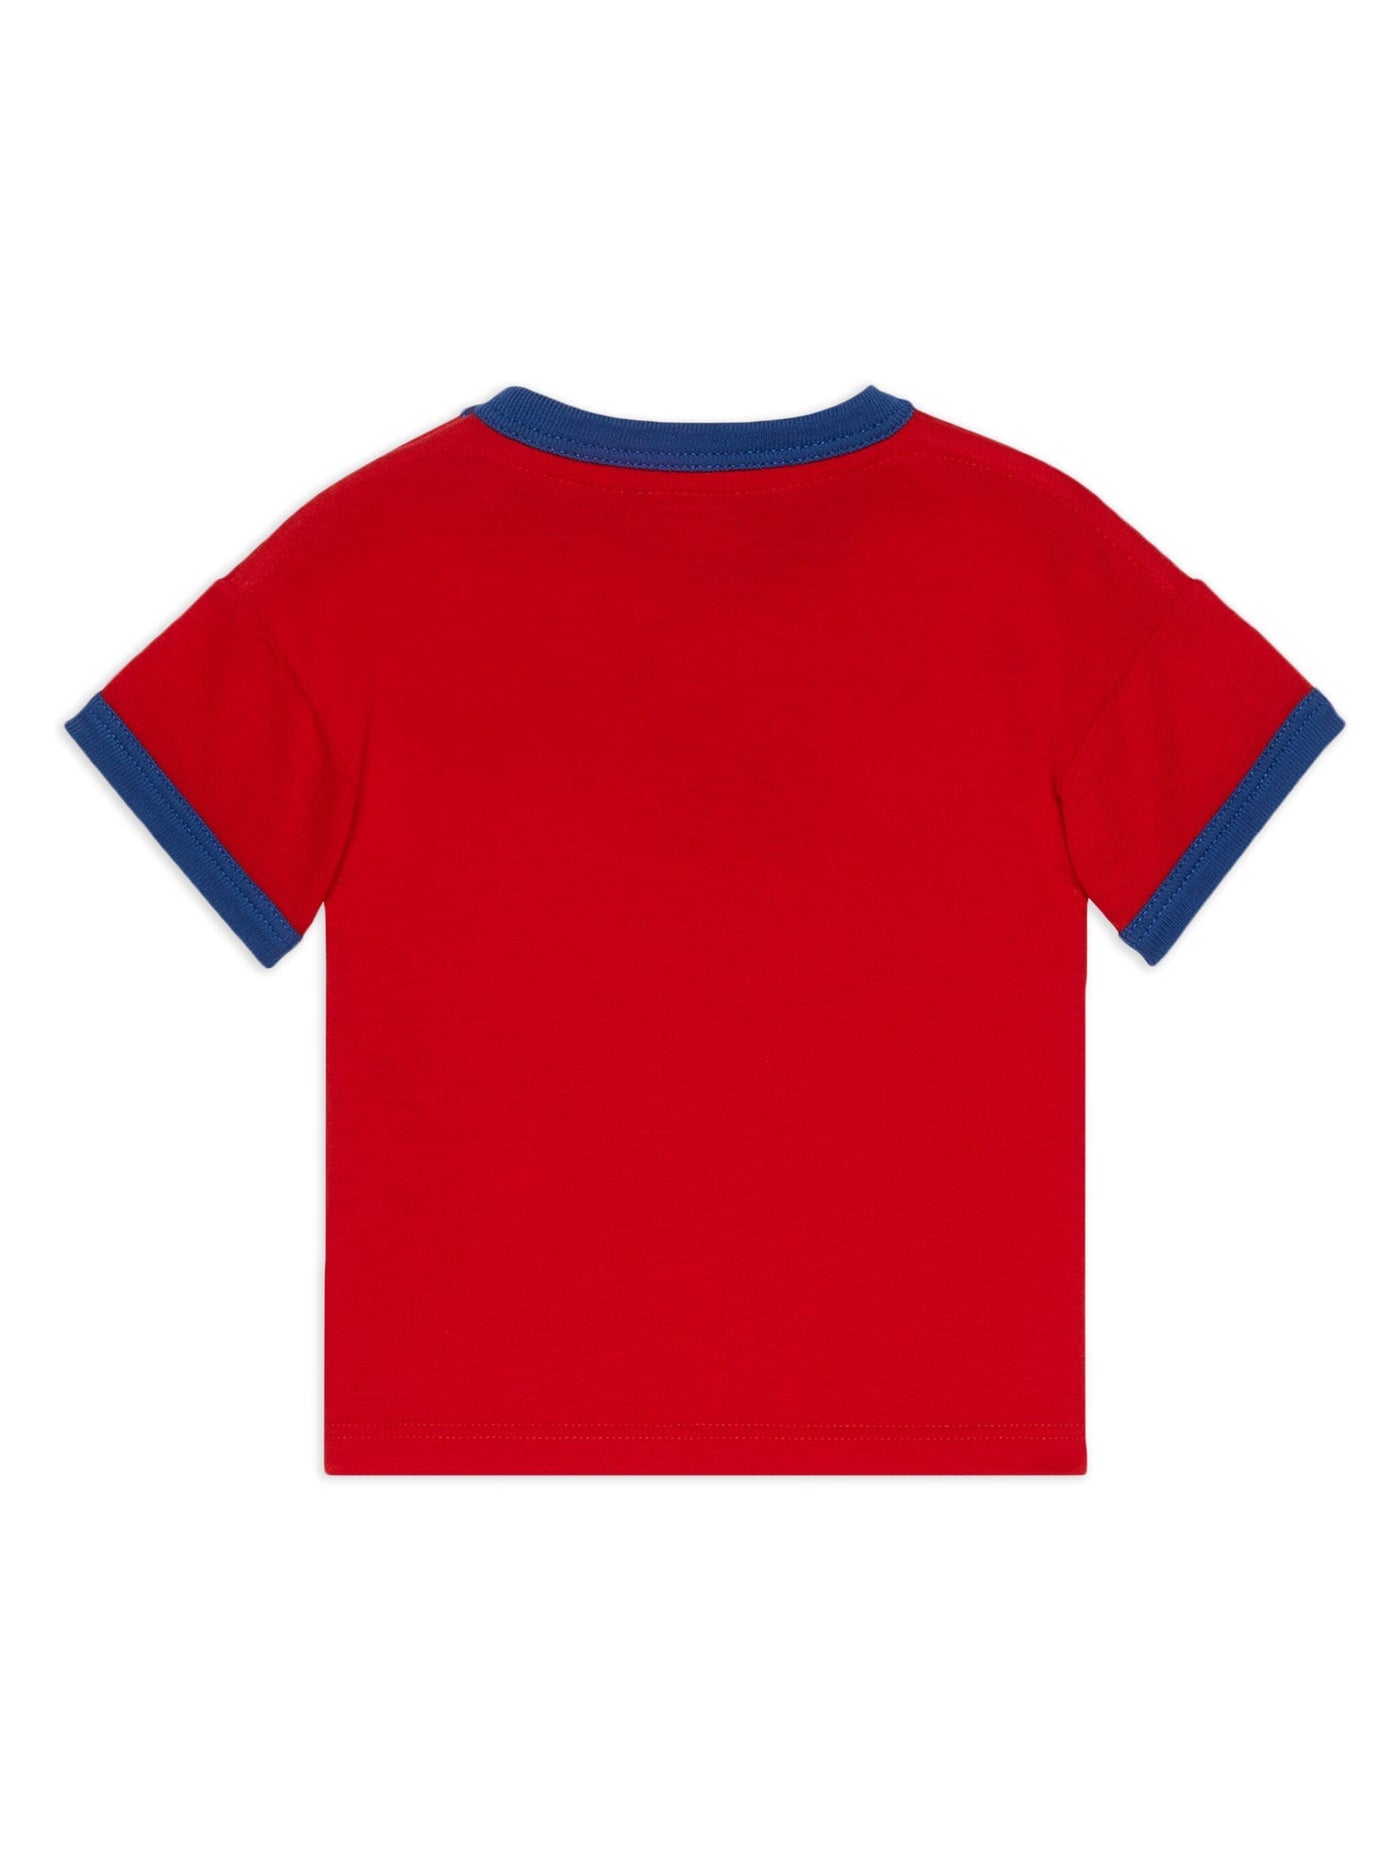 Red cotton jersey baby boy GUCCI t-shirt